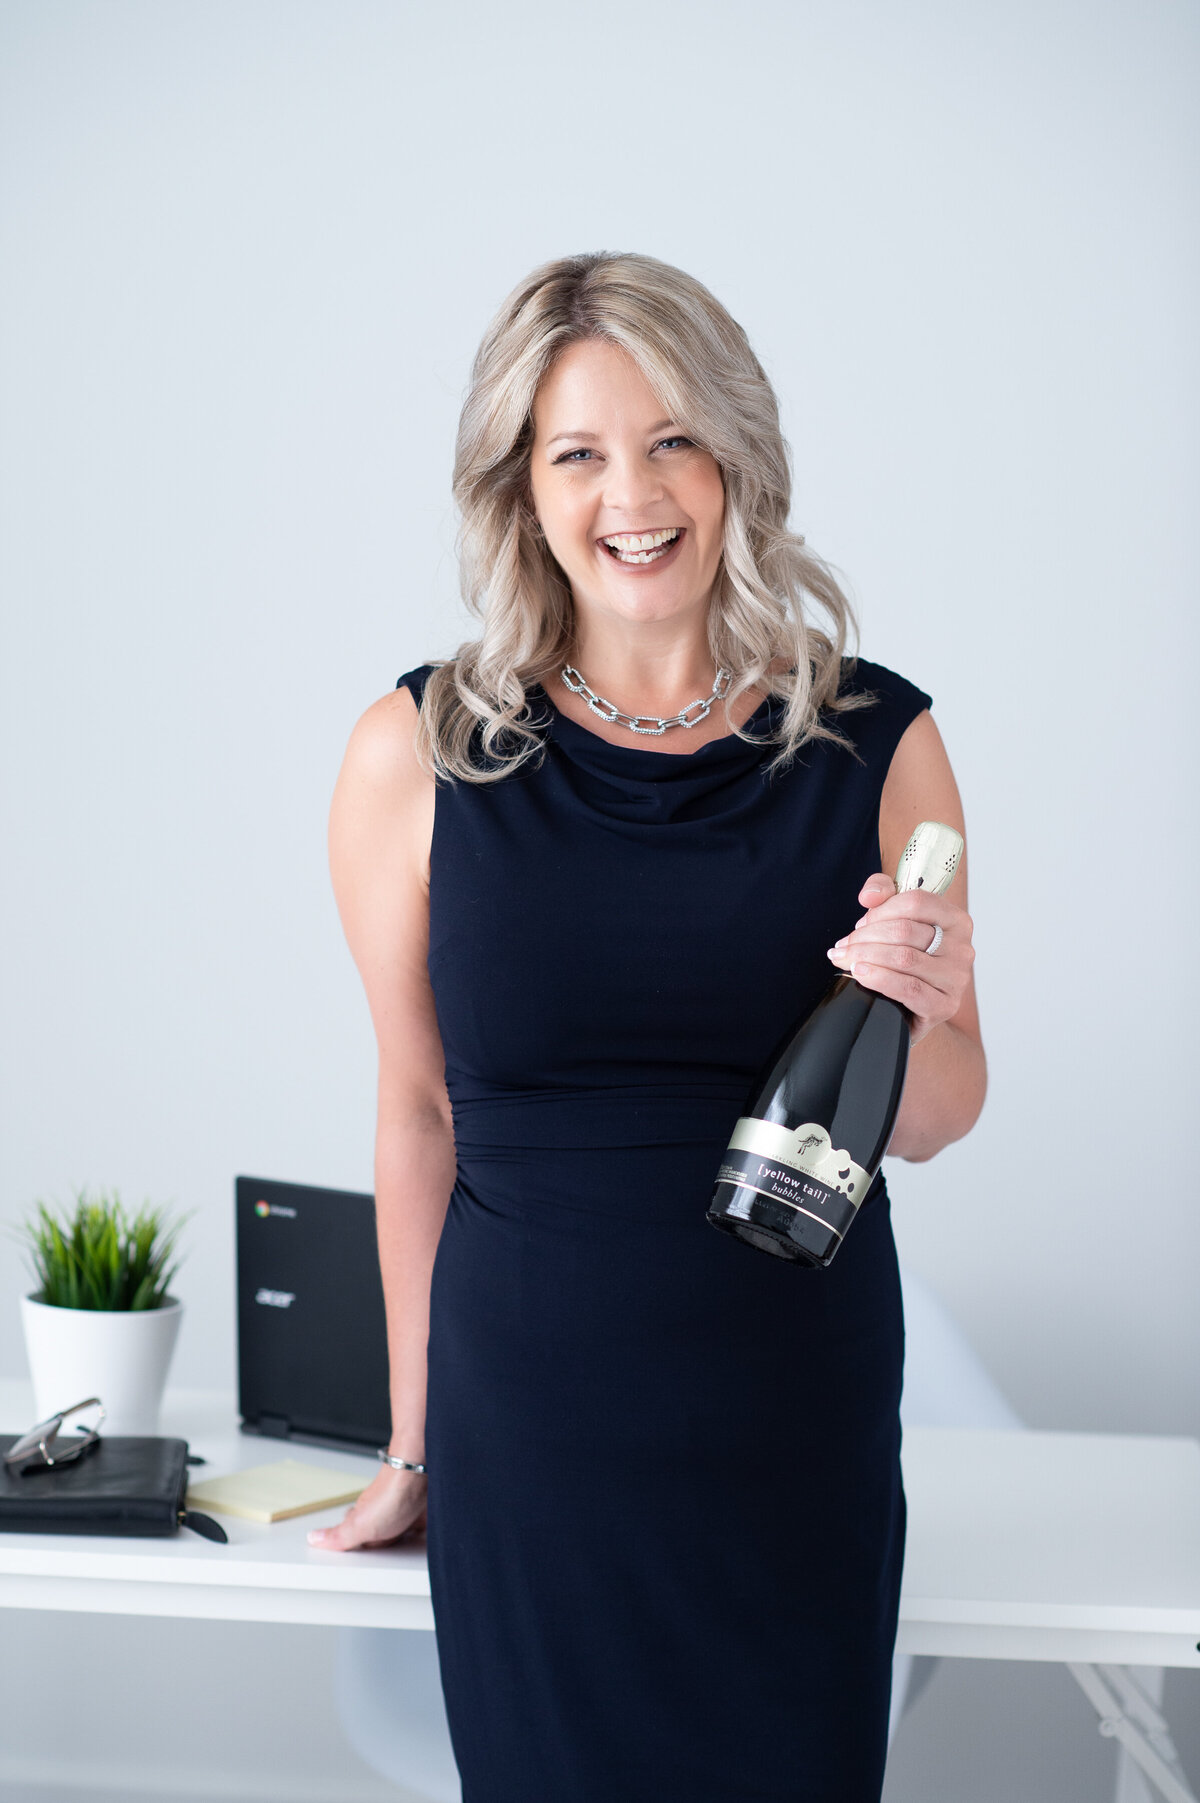 Ottawa branding photography showing a realtor holding a bottle of champagne.  Captured in studio by JEMMAN Photography Commercial